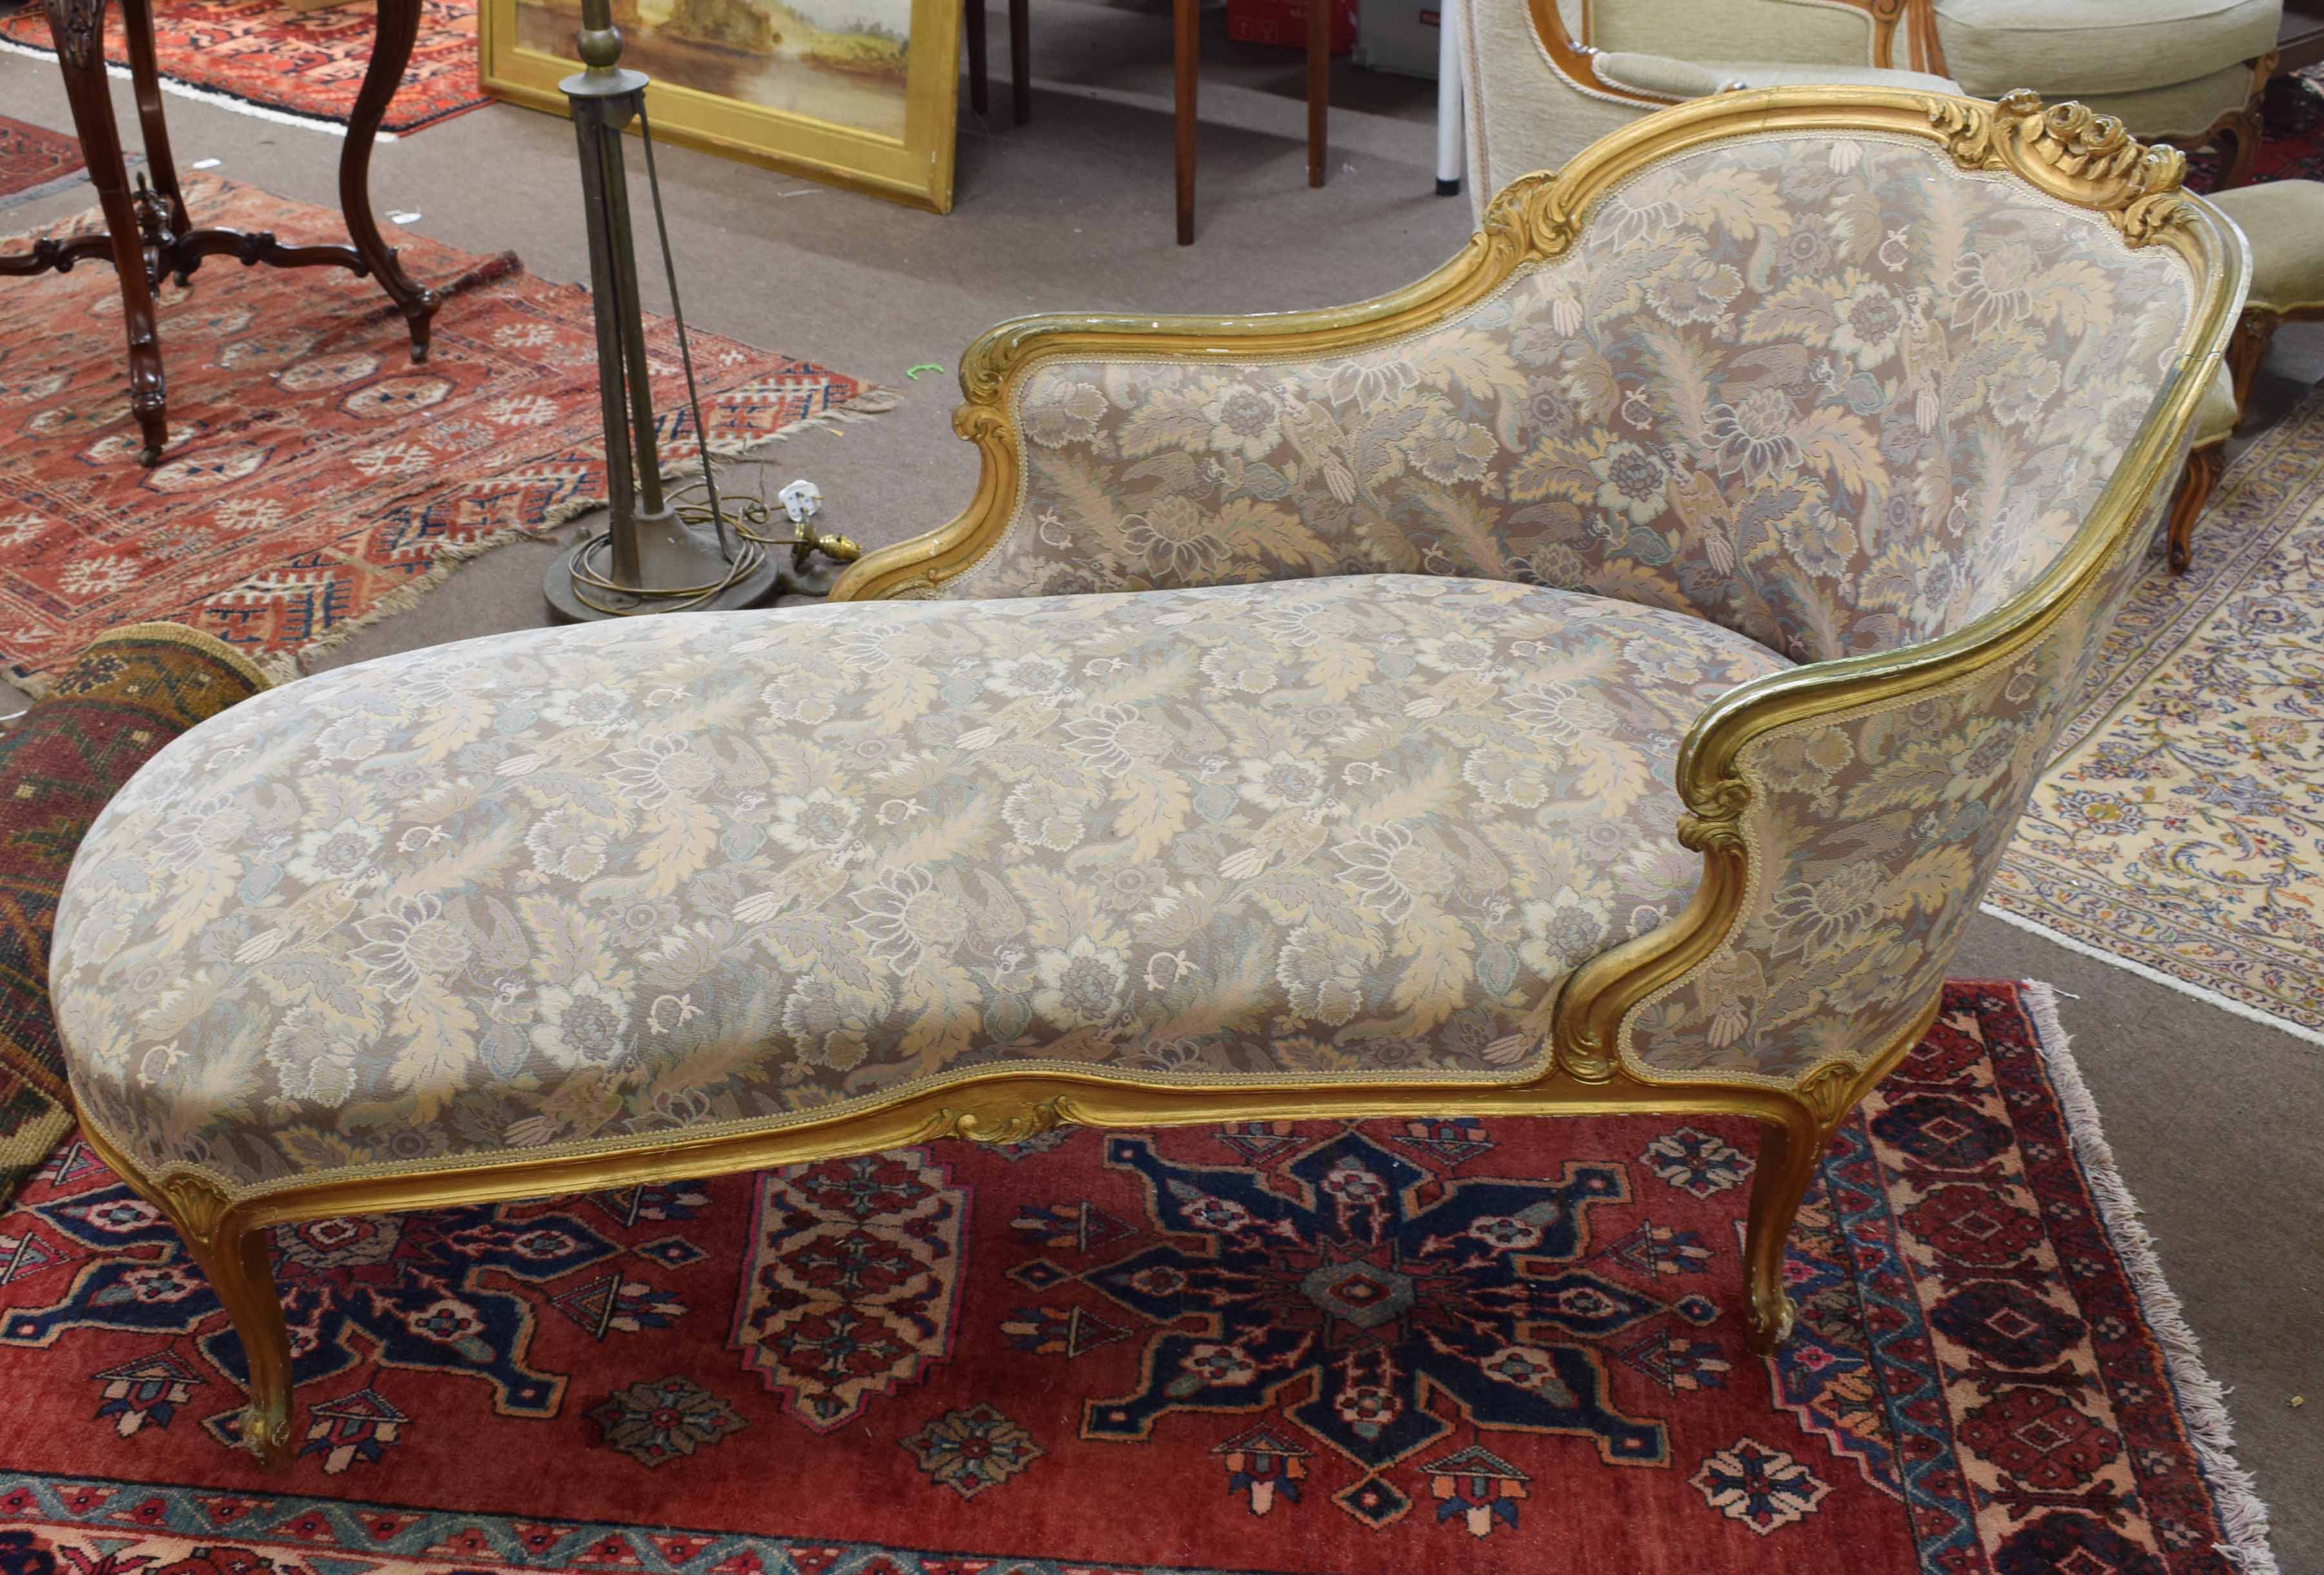 Giltwood chaise longue, swept back encrusted with C-scroll and foliage, upholstered in floral print,